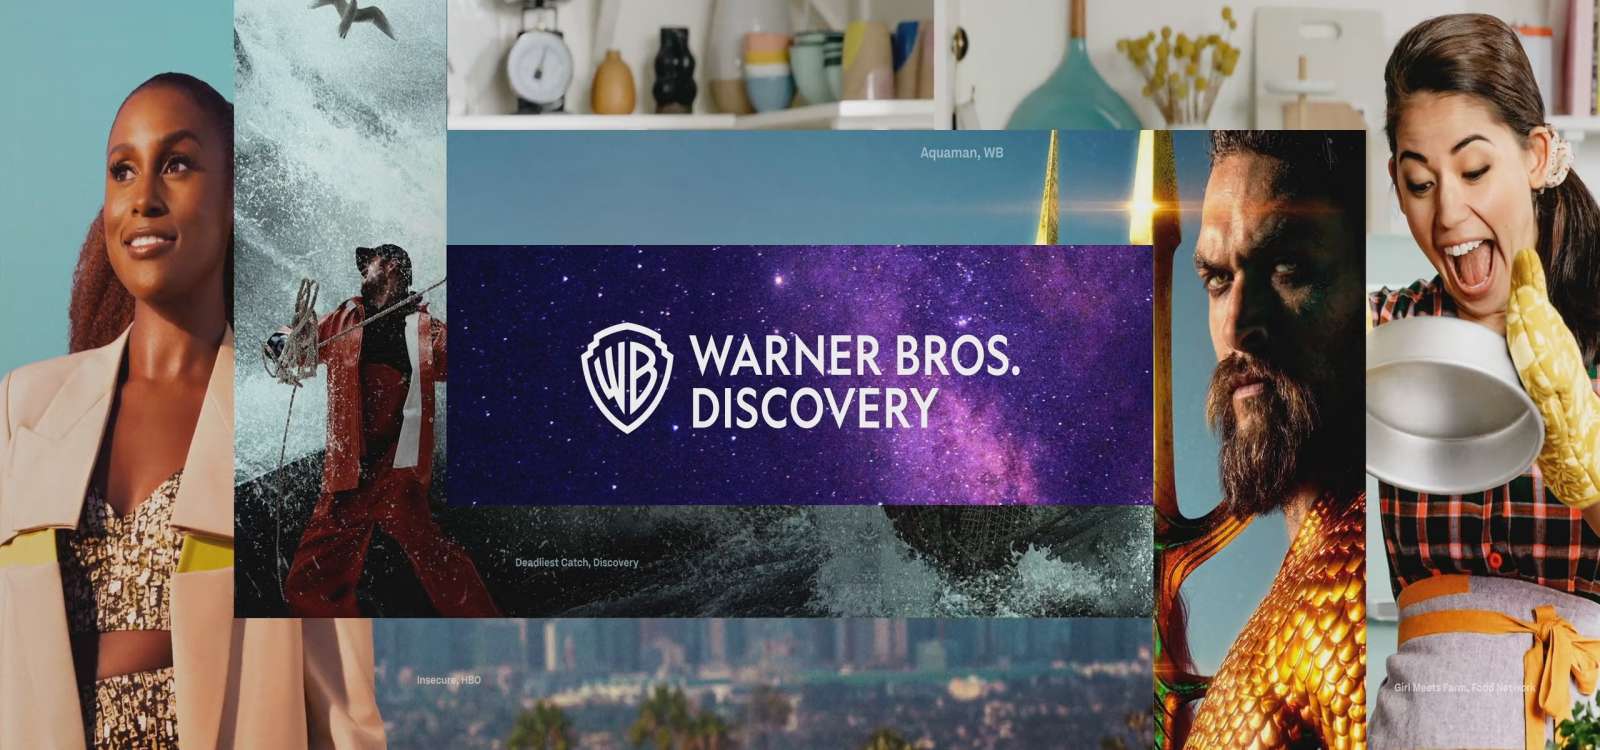 Nasce Warner Bros. Discovery, leader globale nell’intrattenimento e nello streaming